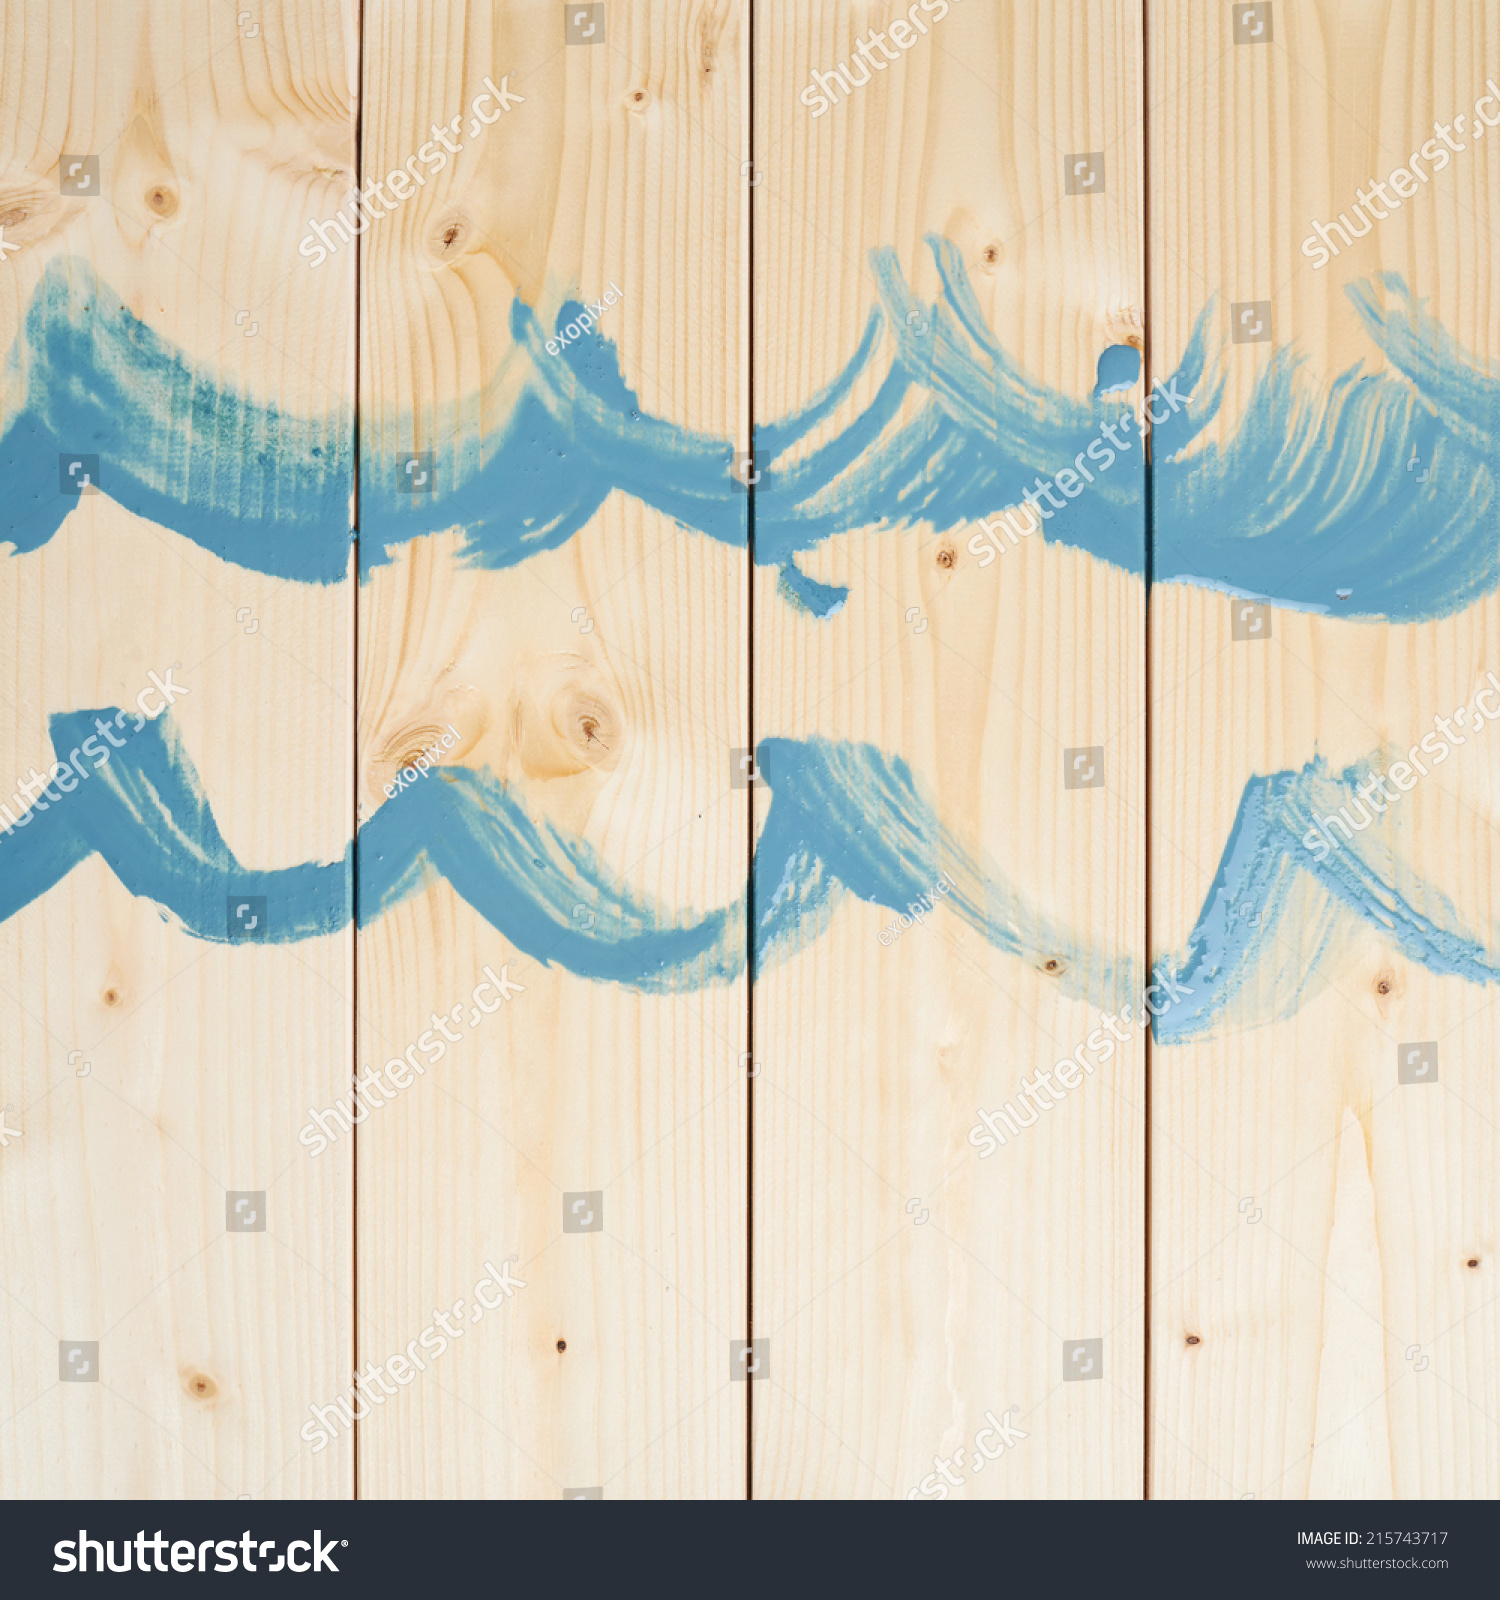 stock photo simple blue waves drawn with the paint over the pine wood boards 215743717